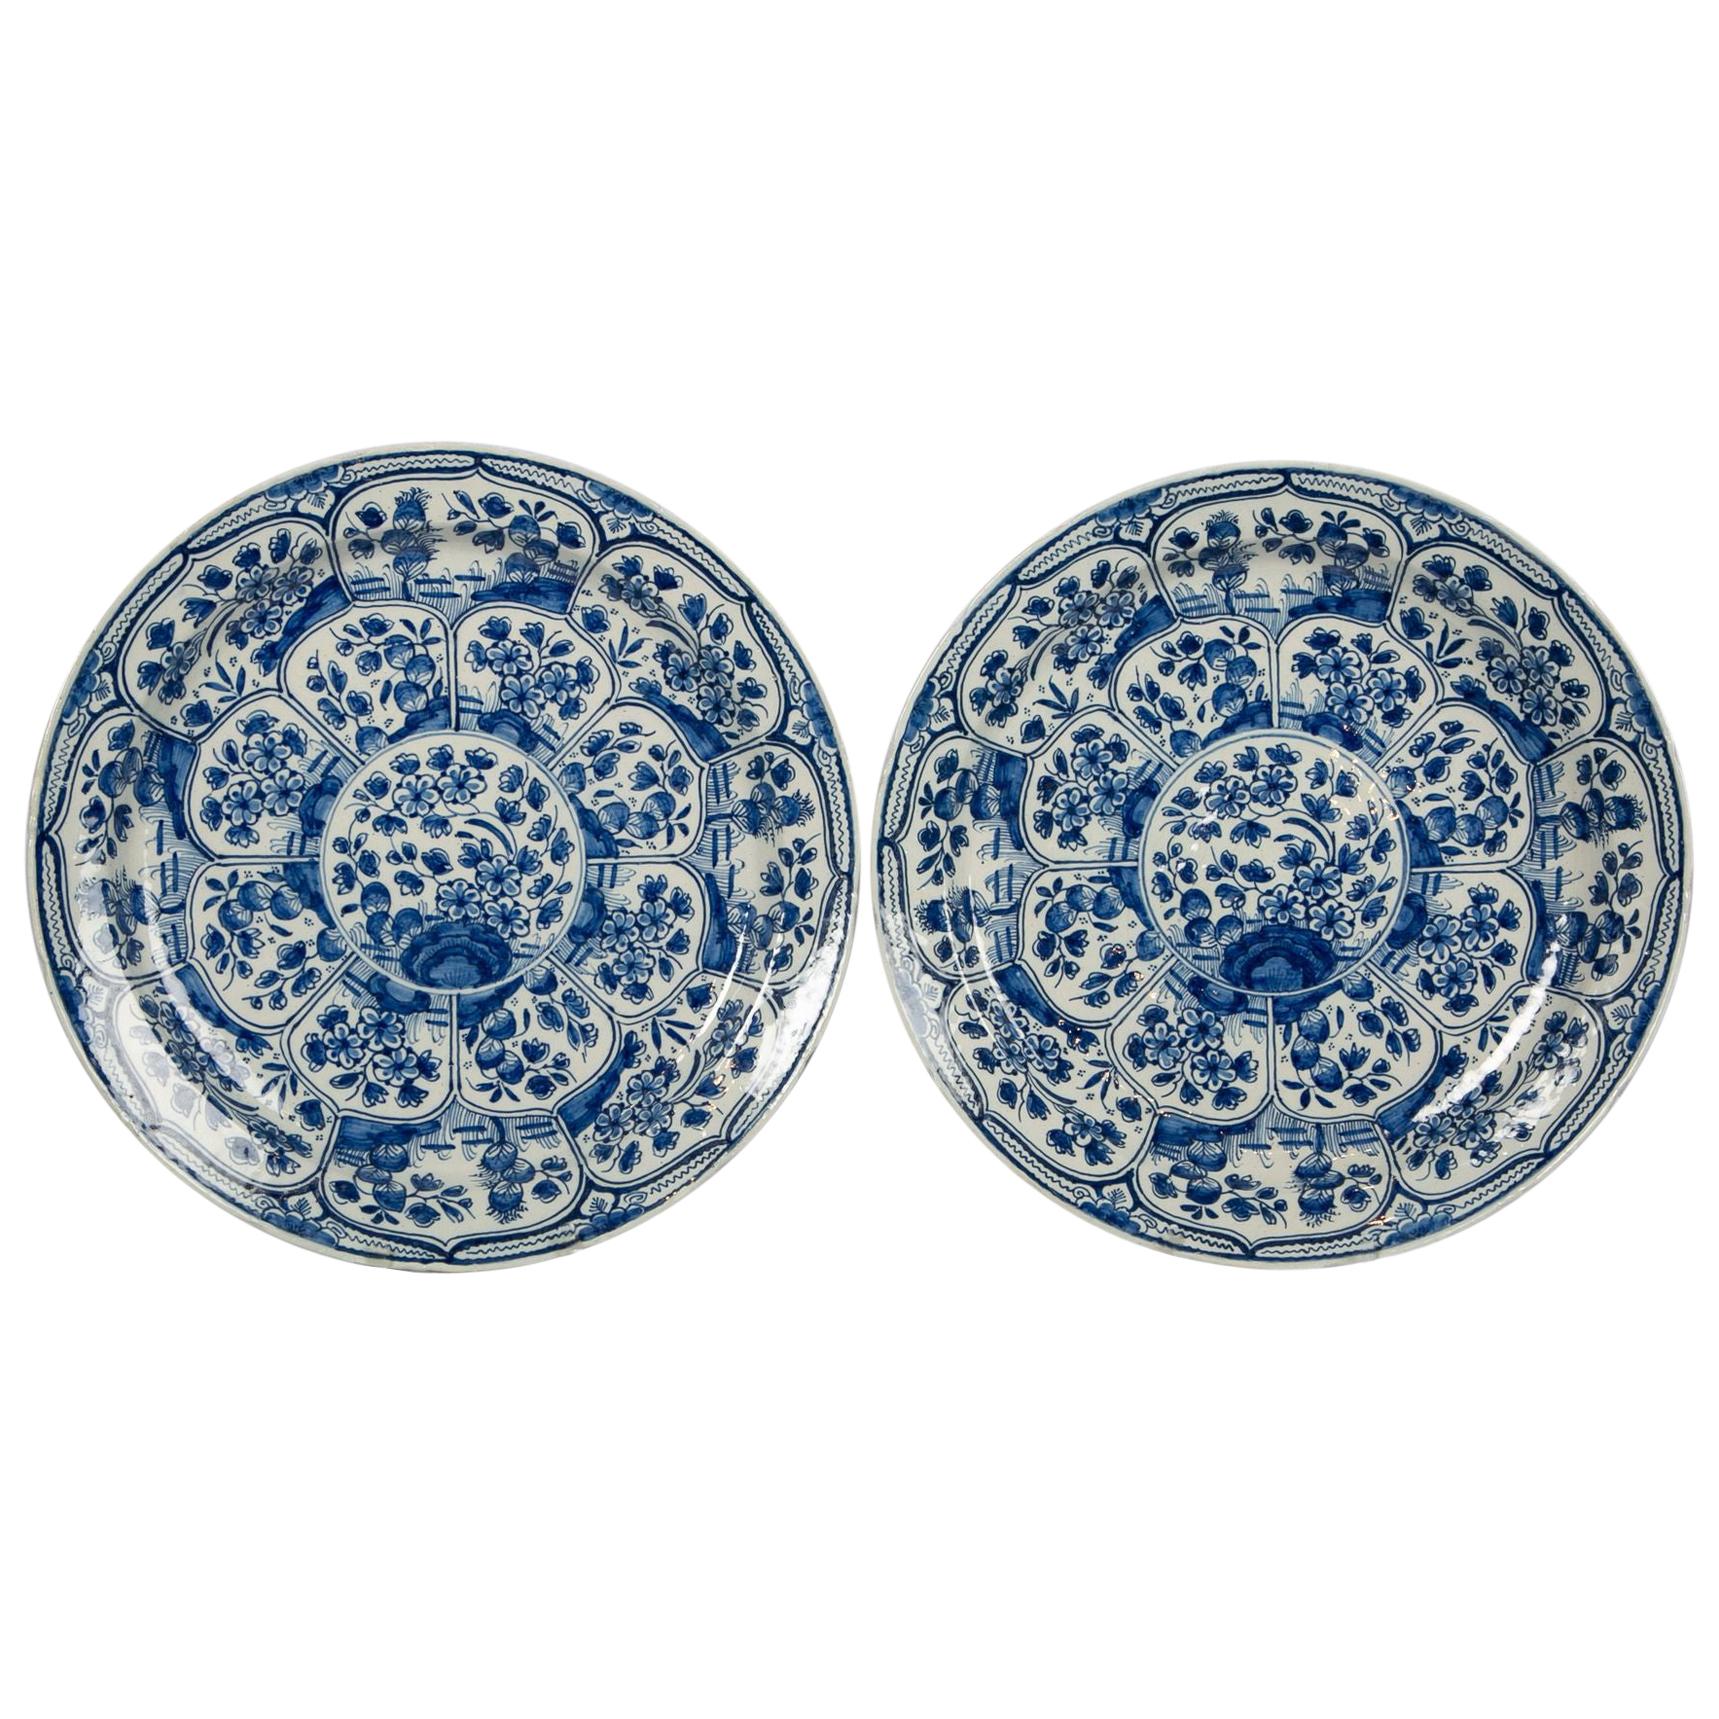 Pair of Blue and White Delft Chargers 18th Century Made by De Witte Starre